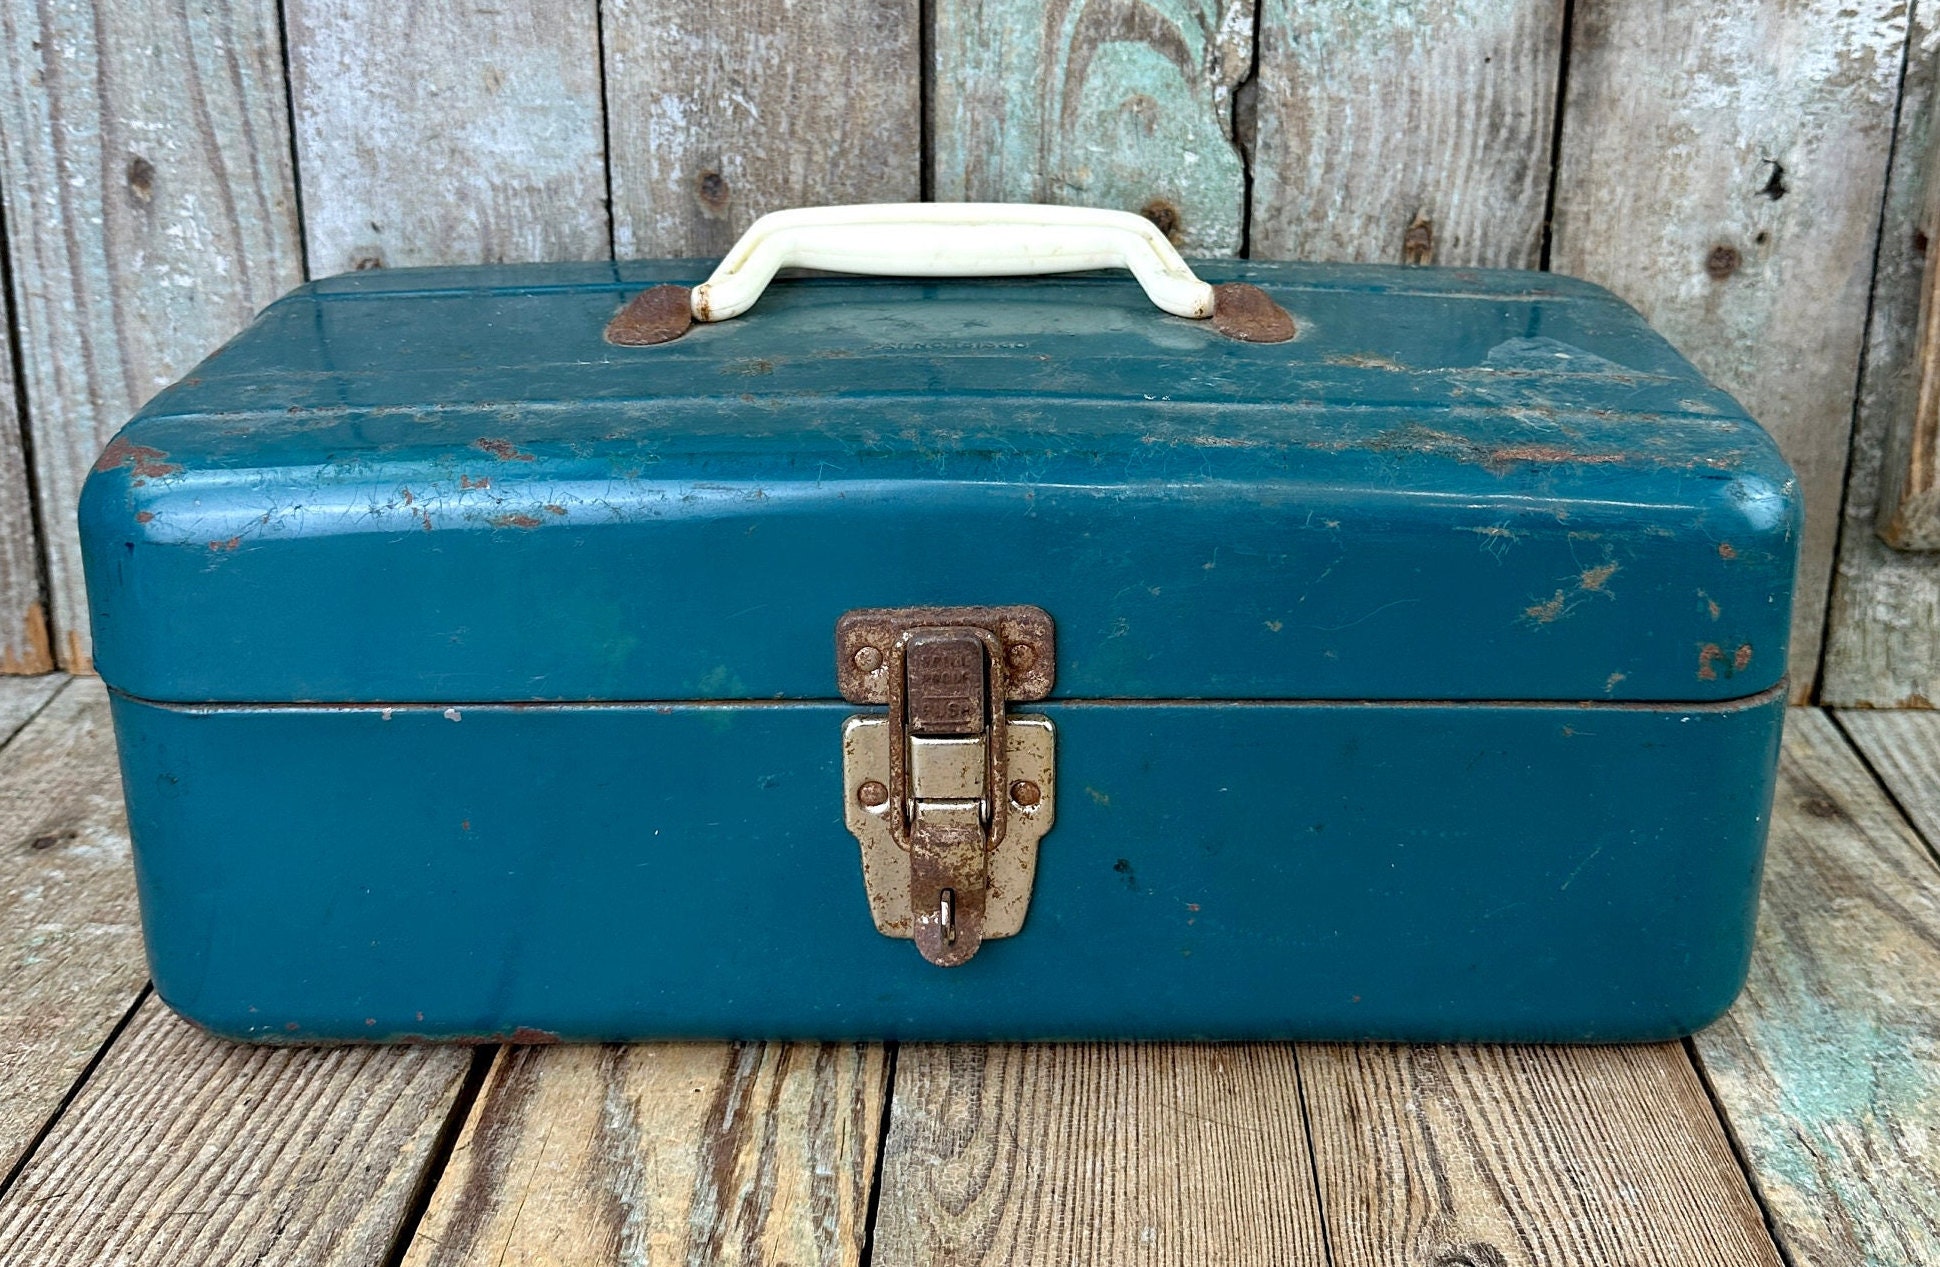 Rusty Old Tackle Box Vintage Metal Fishing Carrying Case Repurposed Decor 